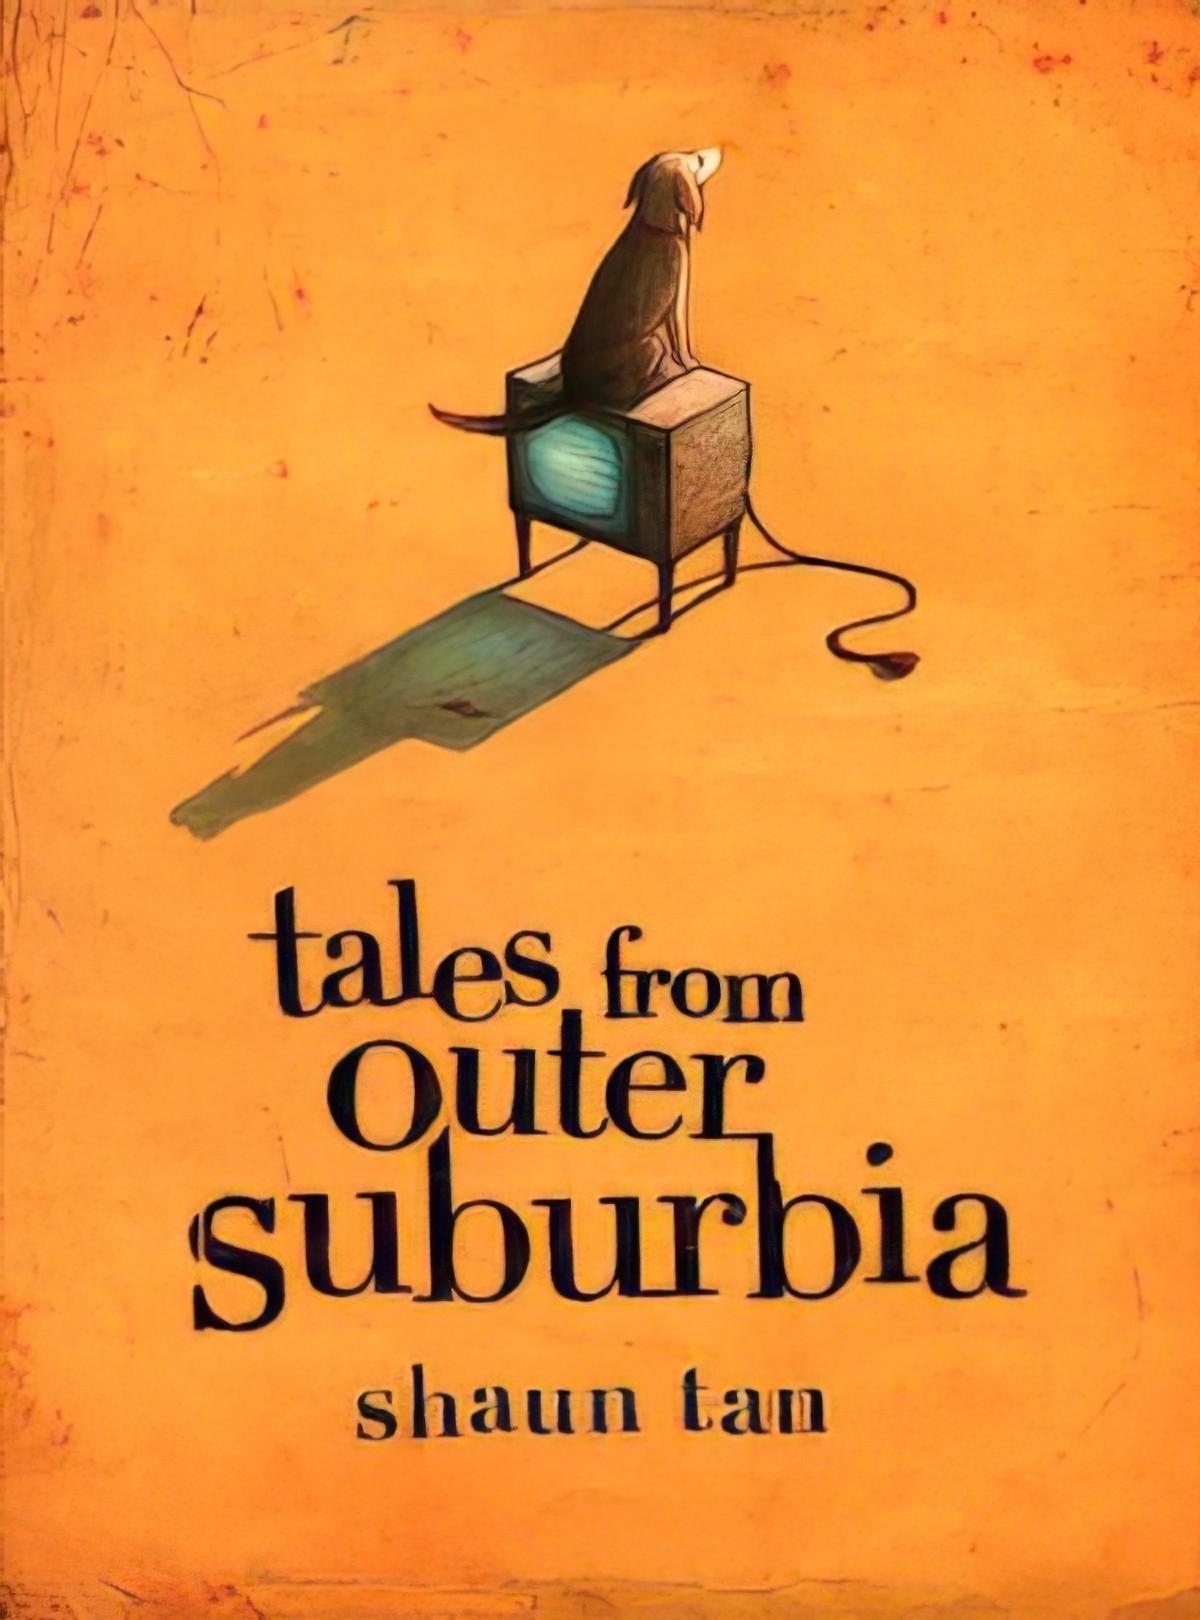 Tales From Outer Suburbia by Shaun Tan Analysis